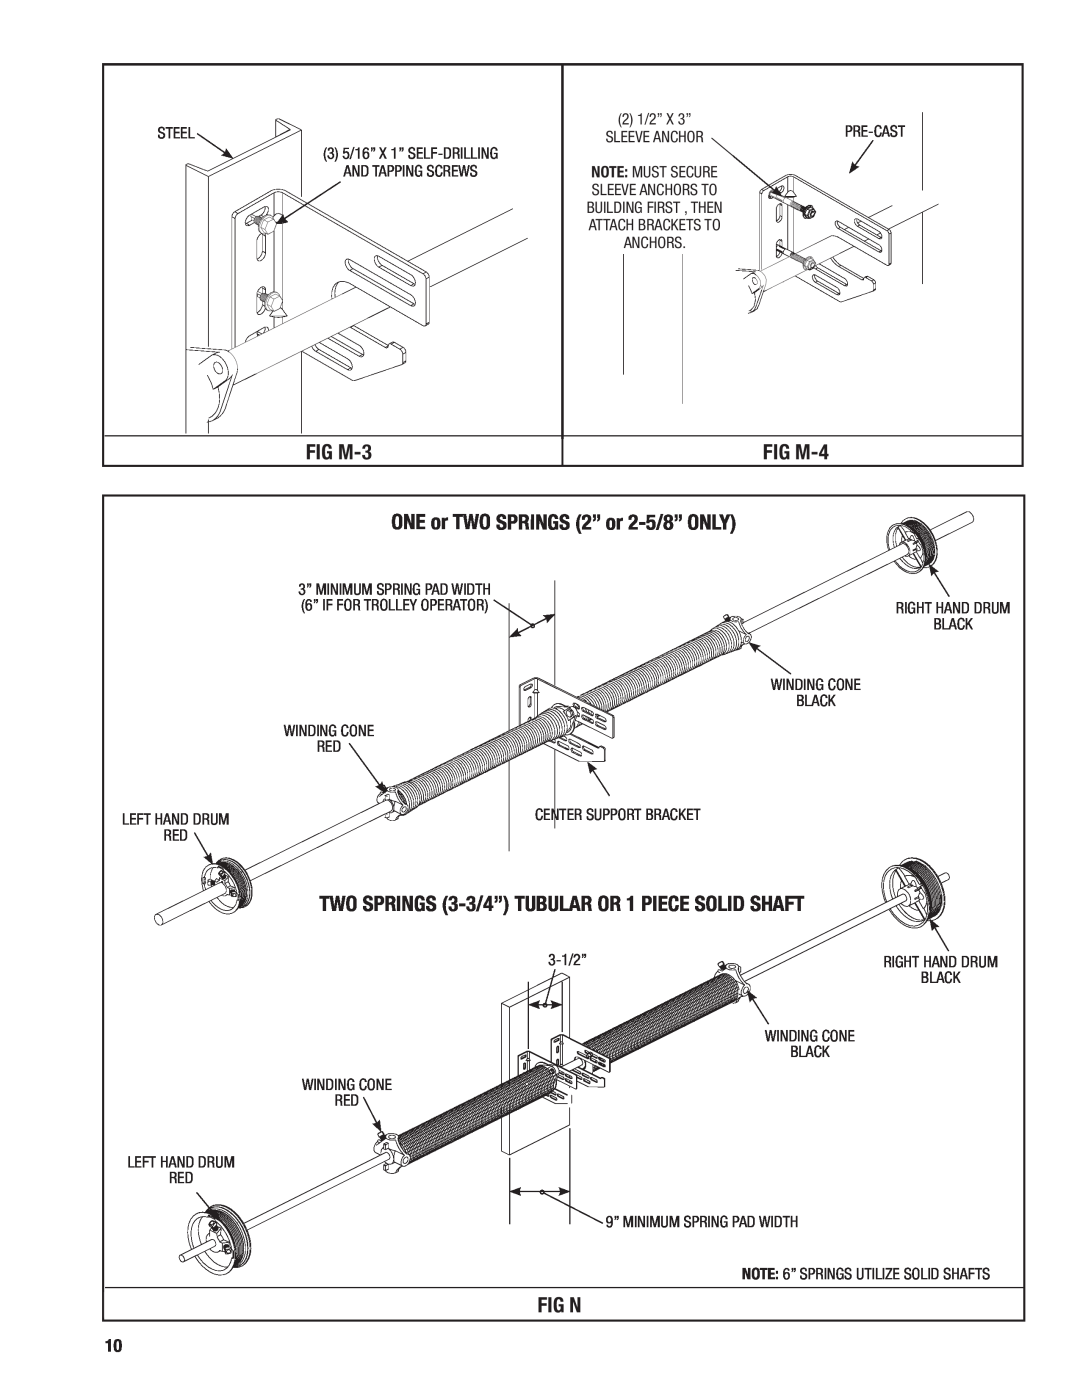 Wayne-Dalton 451, 452 installation instructions FIG M-3, FIG M-4, ONE or TWO SPRINGS 2” or 2-5/8”ONLY, Fig N 